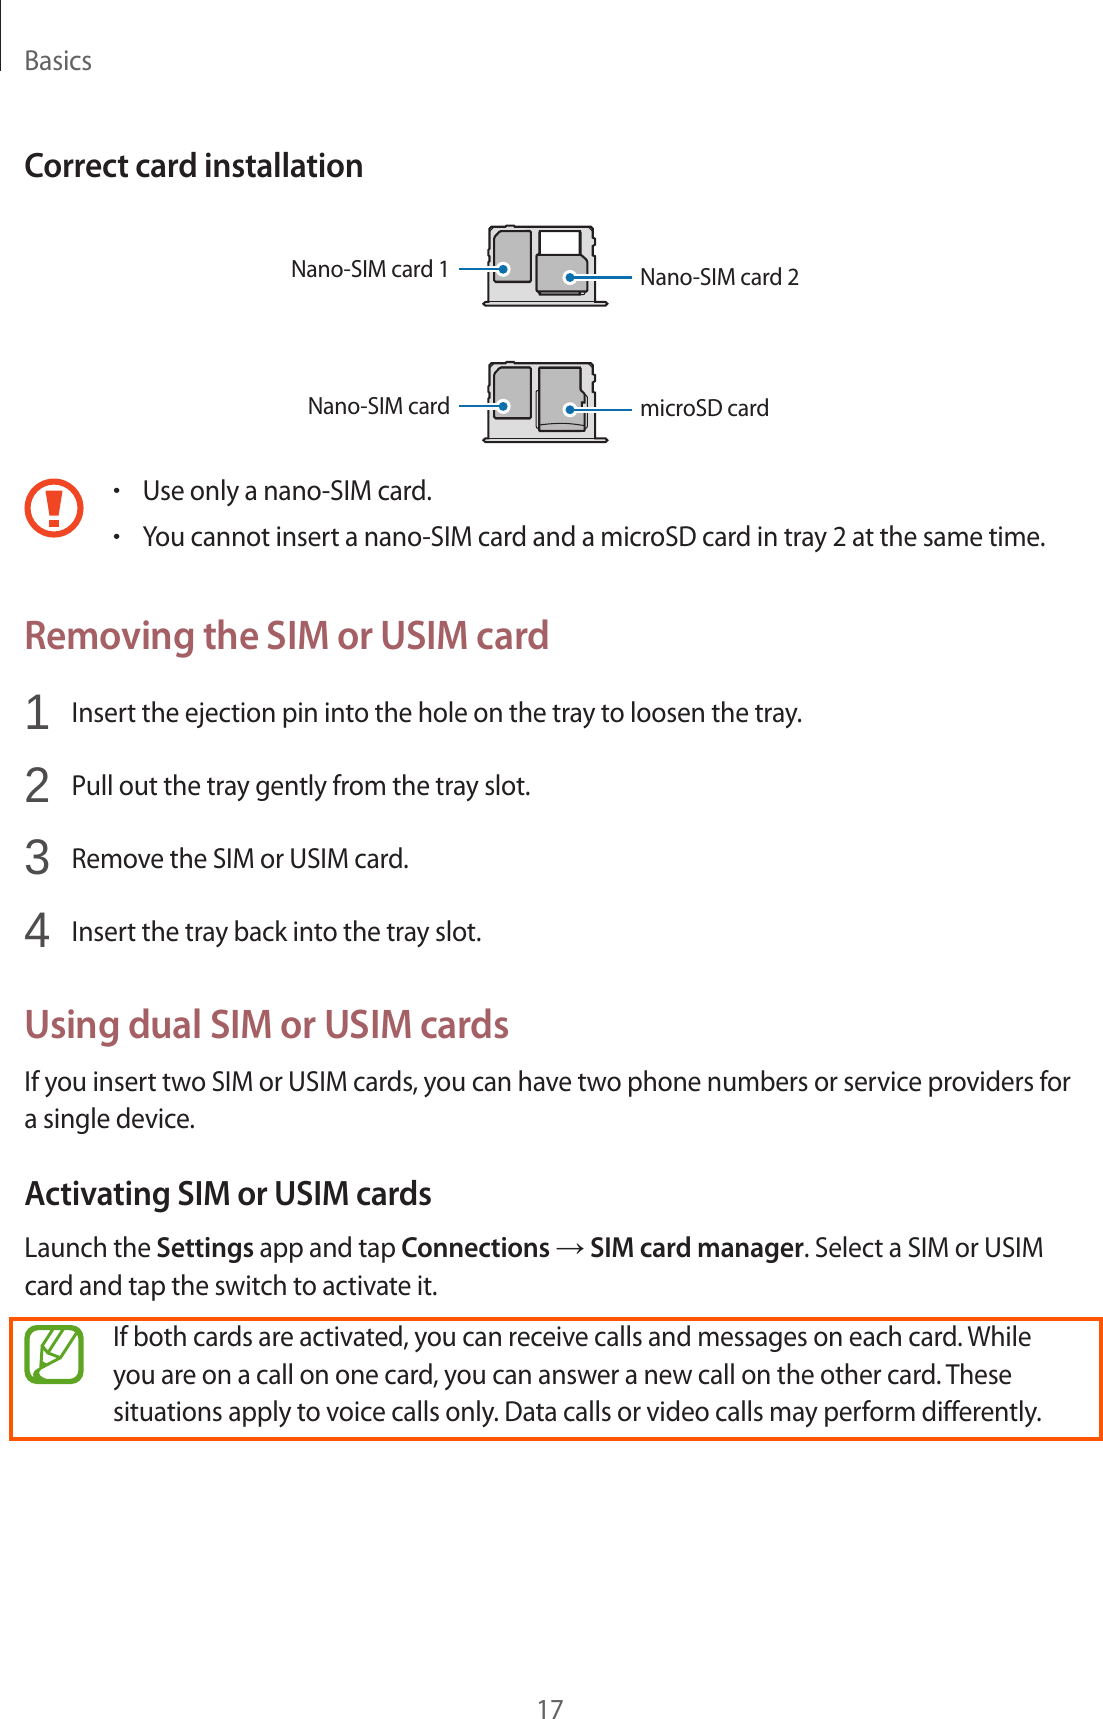 Basics17Correct card installationNano-SIM card 1 Nano-SIM card 2Nano-SIM cardmicroSD card•Use only a nano-SIM card.•You cannot insert a nano-SIM card and a microSD card in tray 2 at the same time.Removing the SIM or USIM card1  Insert the ejection pin into the hole on the tray to loosen the tray.2  Pull out the tray gently from the tray slot.3  Remove the SIM or USIM card.4  Insert the tray back into the tray slot.Using dual SIM or USIM cardsIf you insert two SIM or USIM cards, you can have two phone numbers or service providers for a single device.Activating SIM or USIM cardsLaunch the Settings app and tap Connections → SIM card manager. Select a SIM or USIM card and tap the switch to activate it.If both cards are activated, you can receive calls and messages on each card. While you are on a call on one card, you can answer a new call on the other card. These situations apply to voice calls only. Data calls or video calls may perform differently.